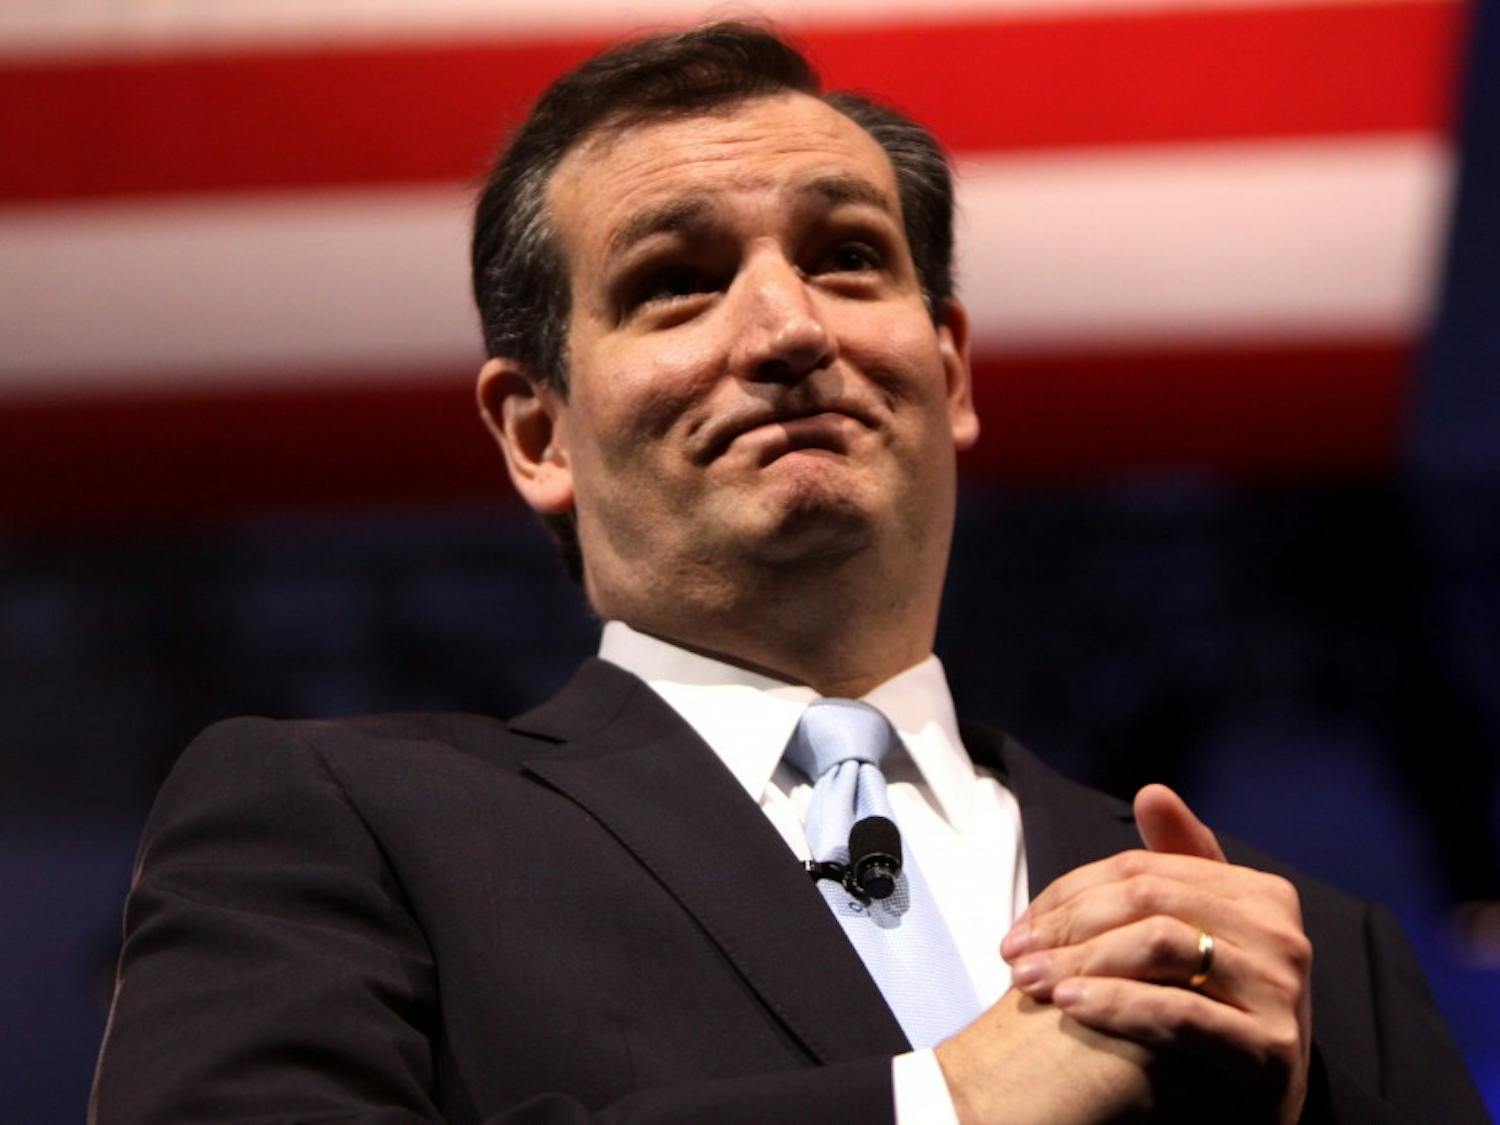 Republican presidential candidate Ted Cruz continued his dominant family game night showing with precise application of ‘enhanced interrogation’ techniques, namely waterboarding.